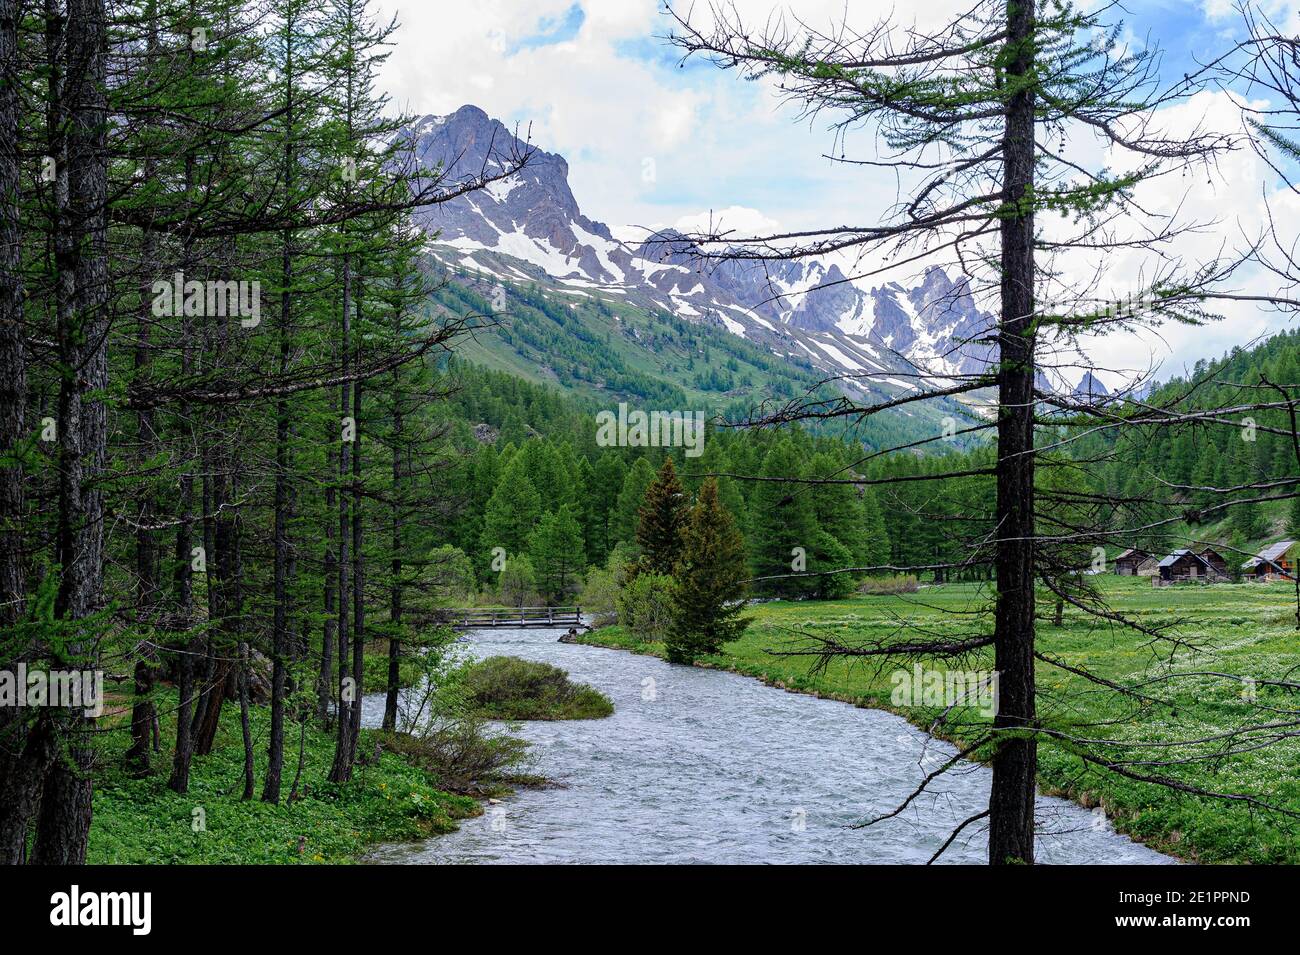 Mountain landscape in summer, a river flows between the larch trees. In the background, a group of chalets. Stock Photo